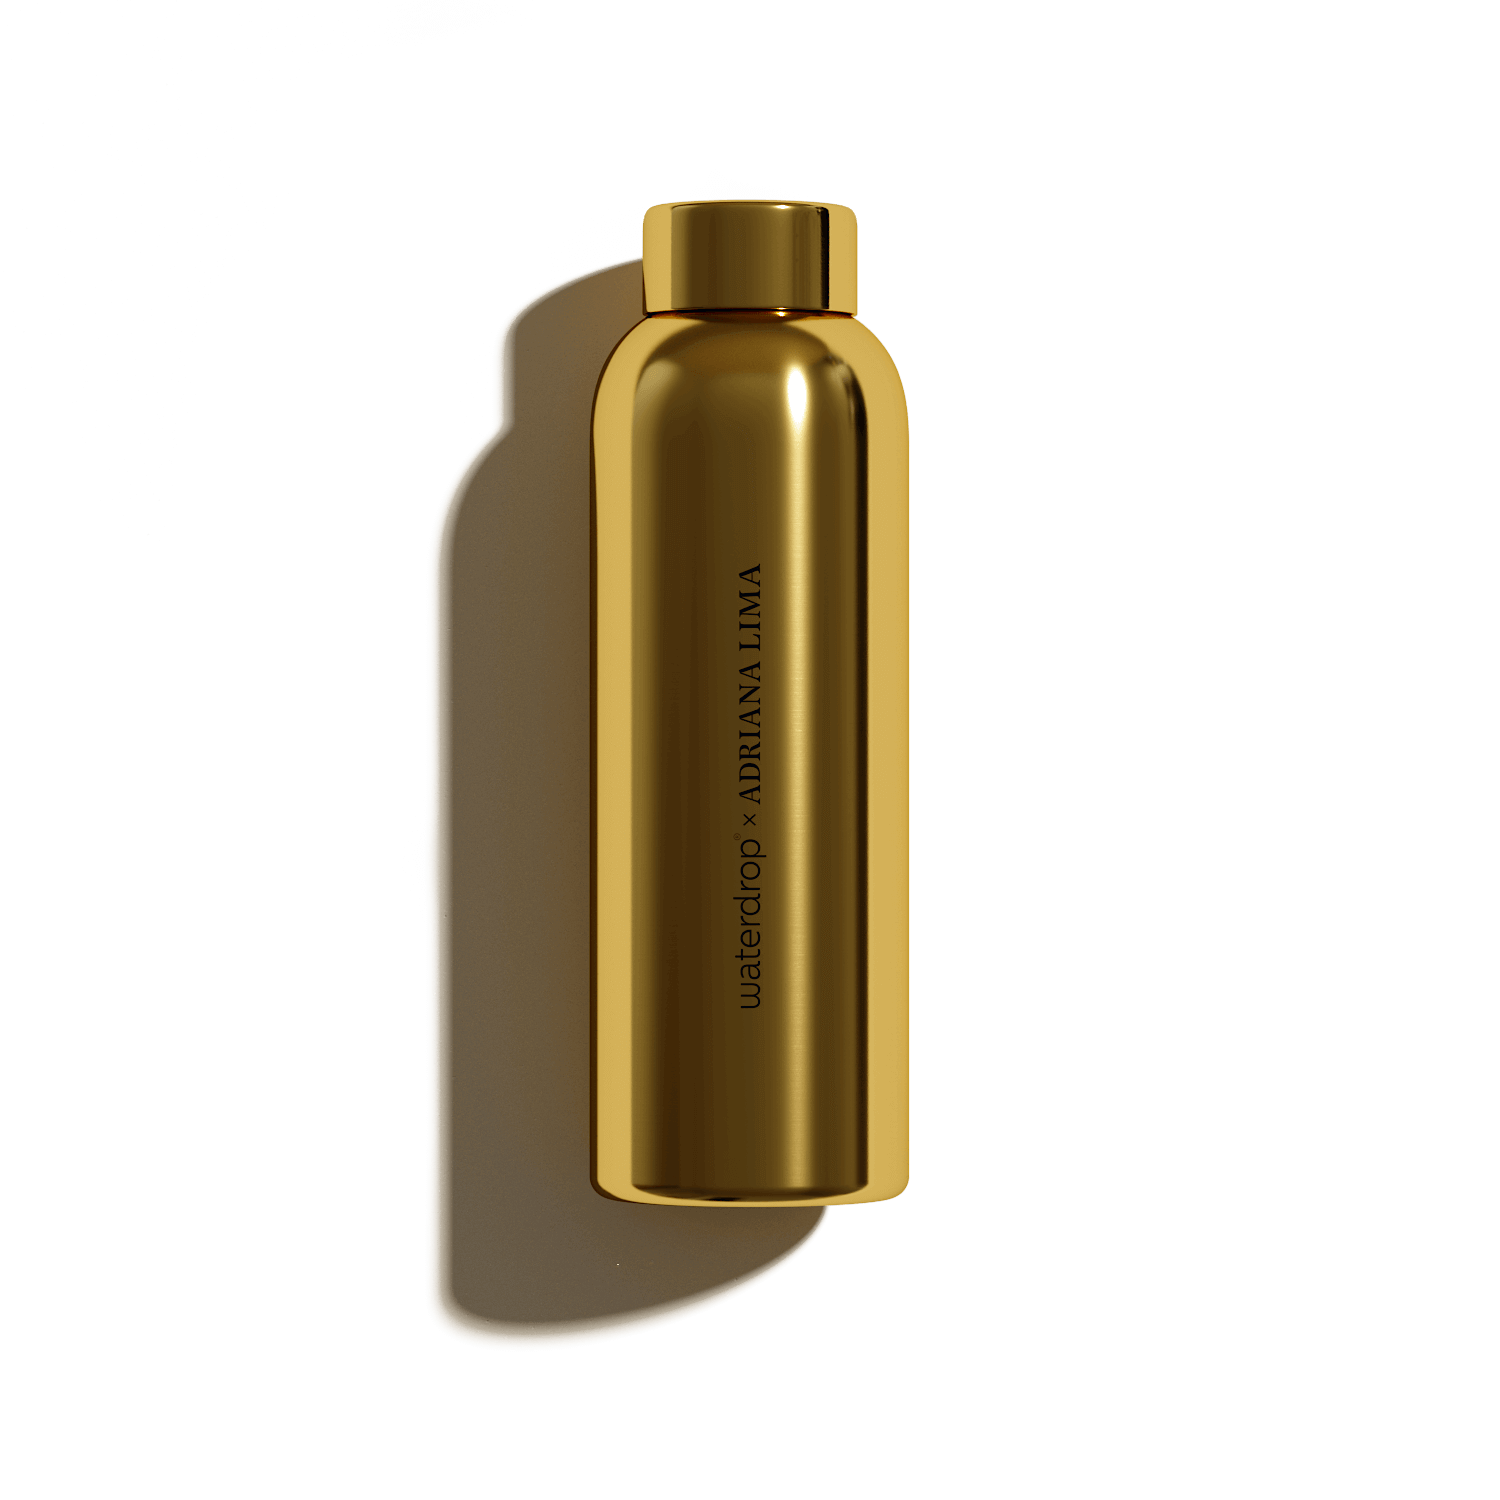 Thermos 16 oz Sip Stainless Steel Drink Bottle, Gold